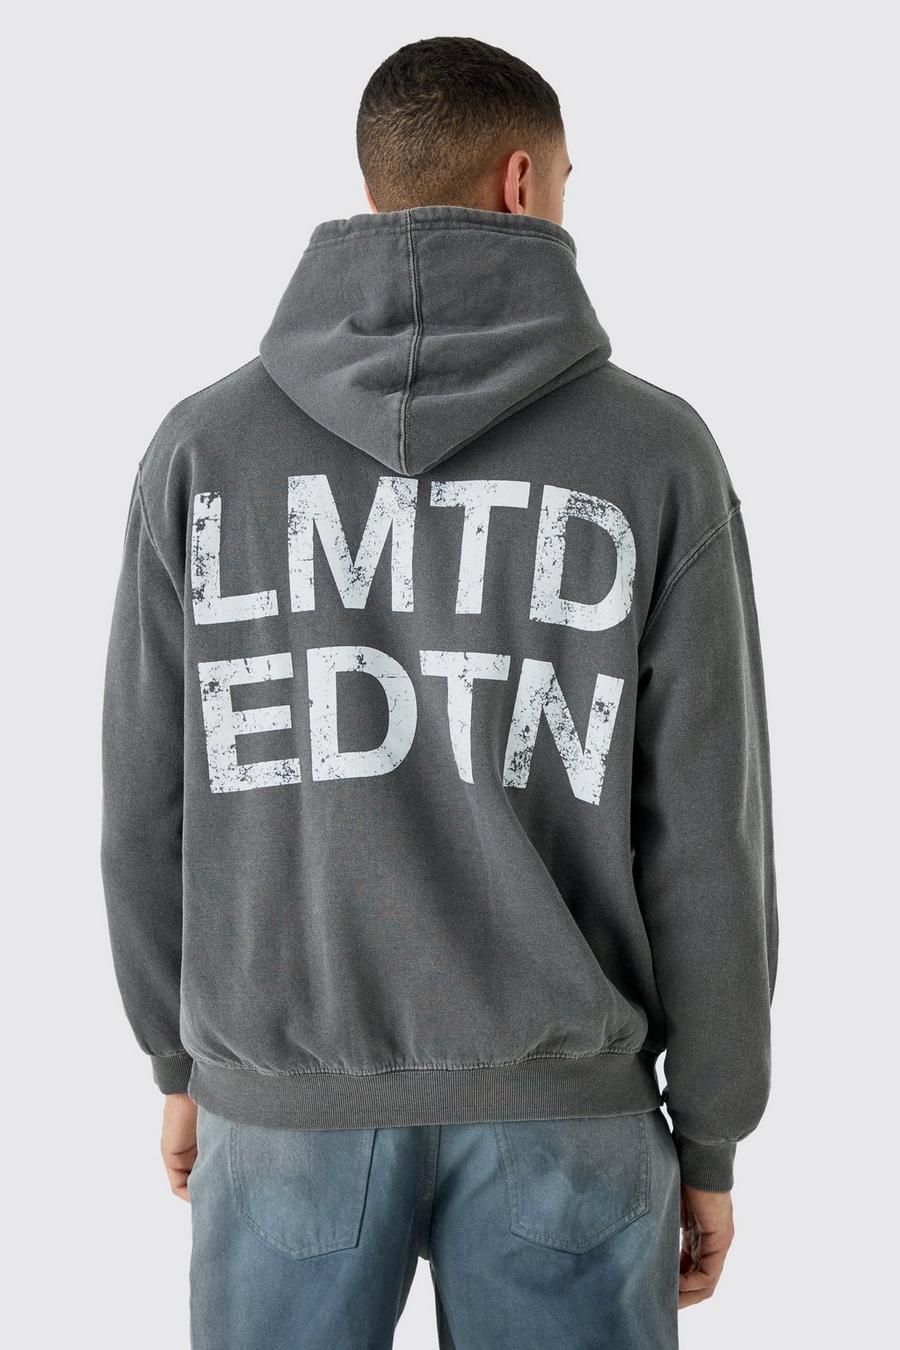 Charcoal Oversized Overdyed Lmtd Graphic Hoodie image number 1